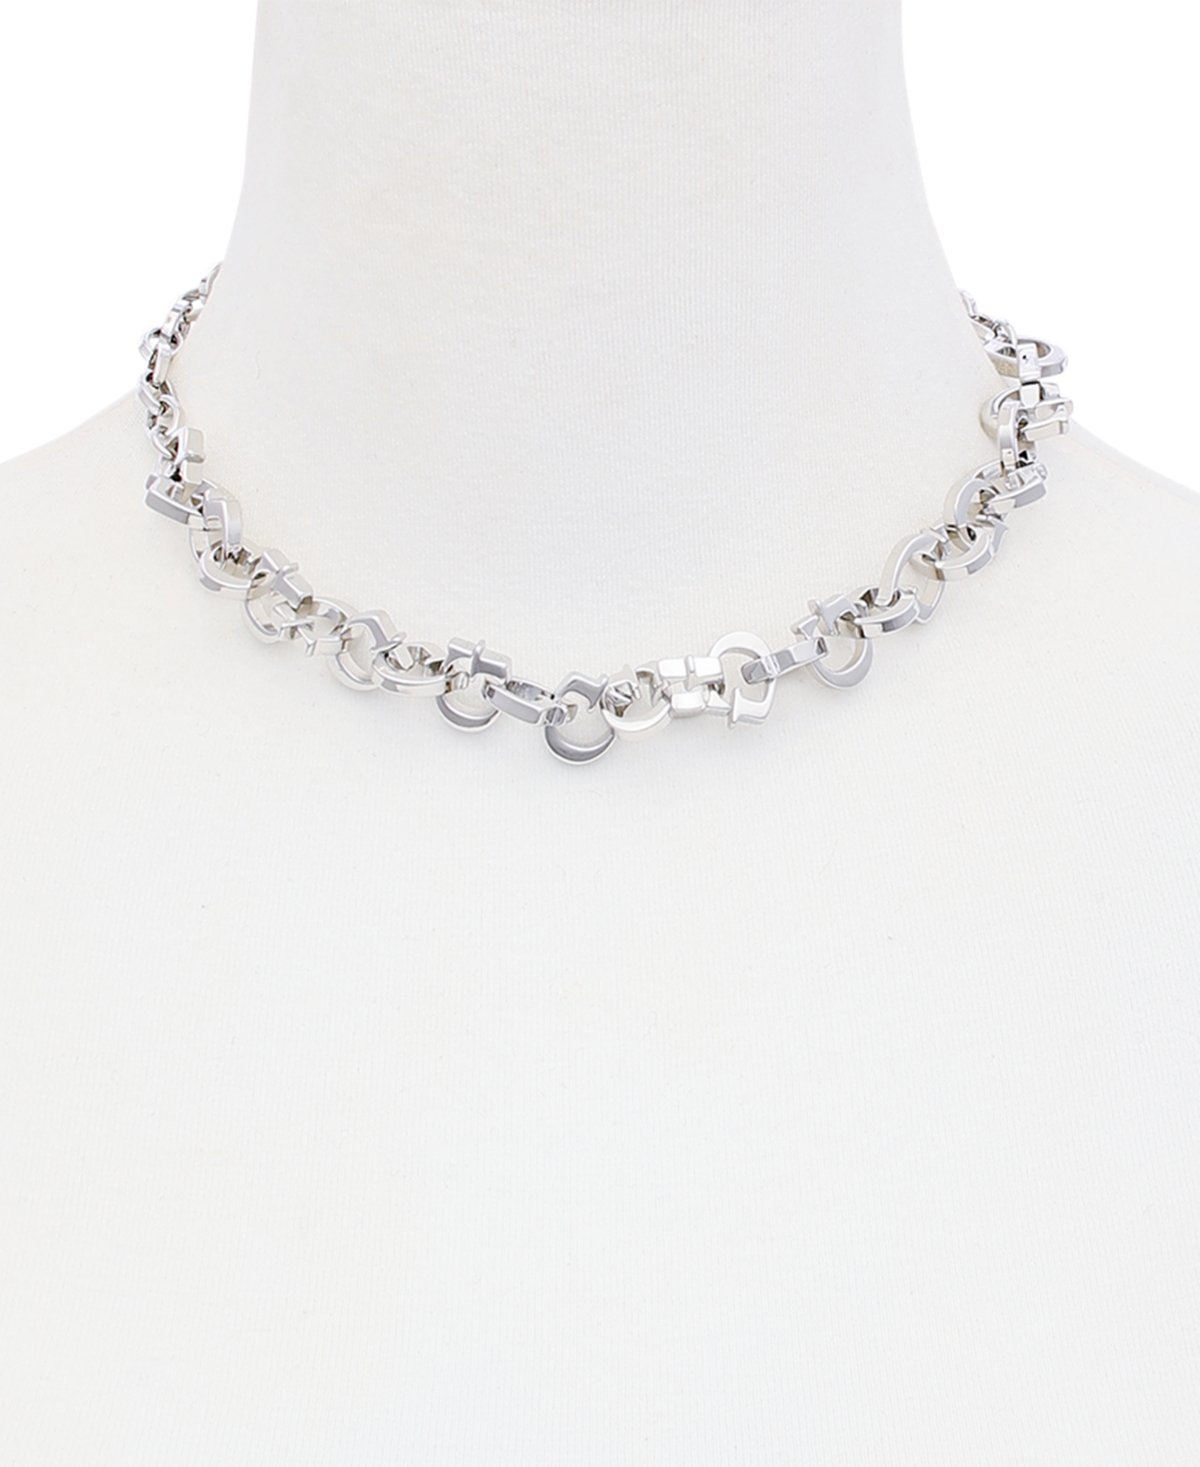 Shop Guess Silver-tone Alternating G Link Collar Necklace, 16" + 2" Extender